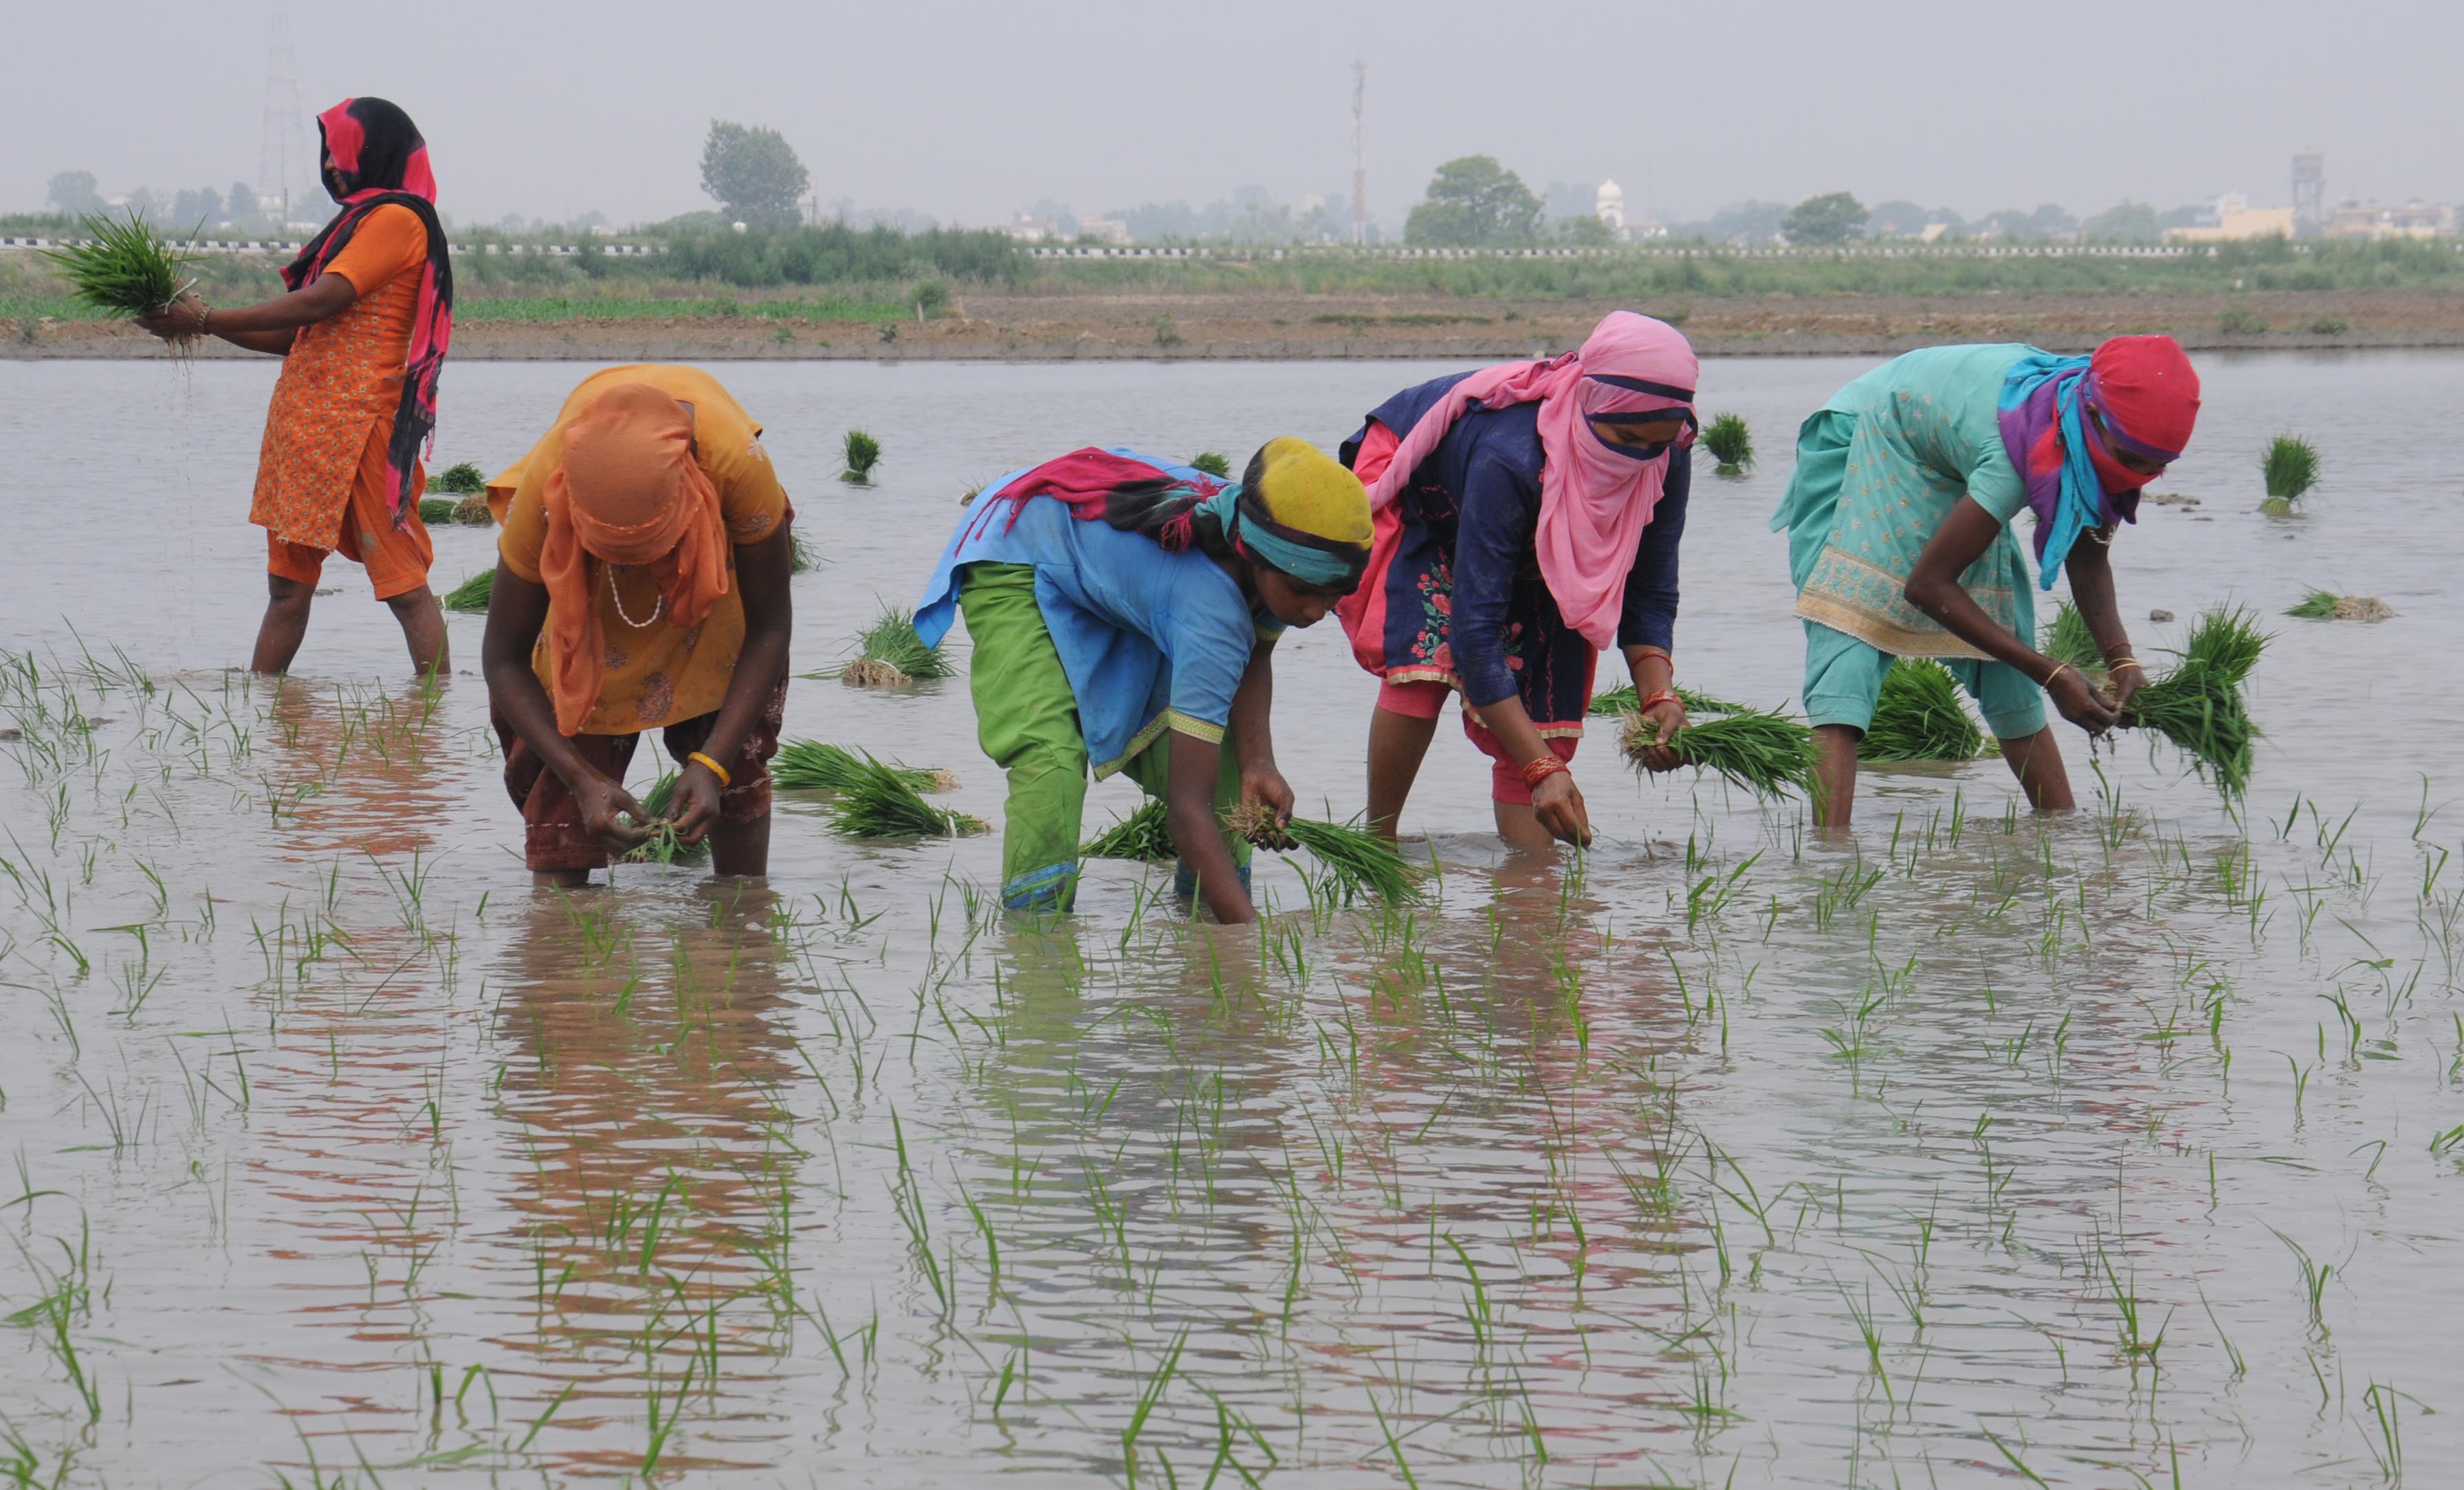 Demand up, PSPCL braces for costliest paddy season in Punjab